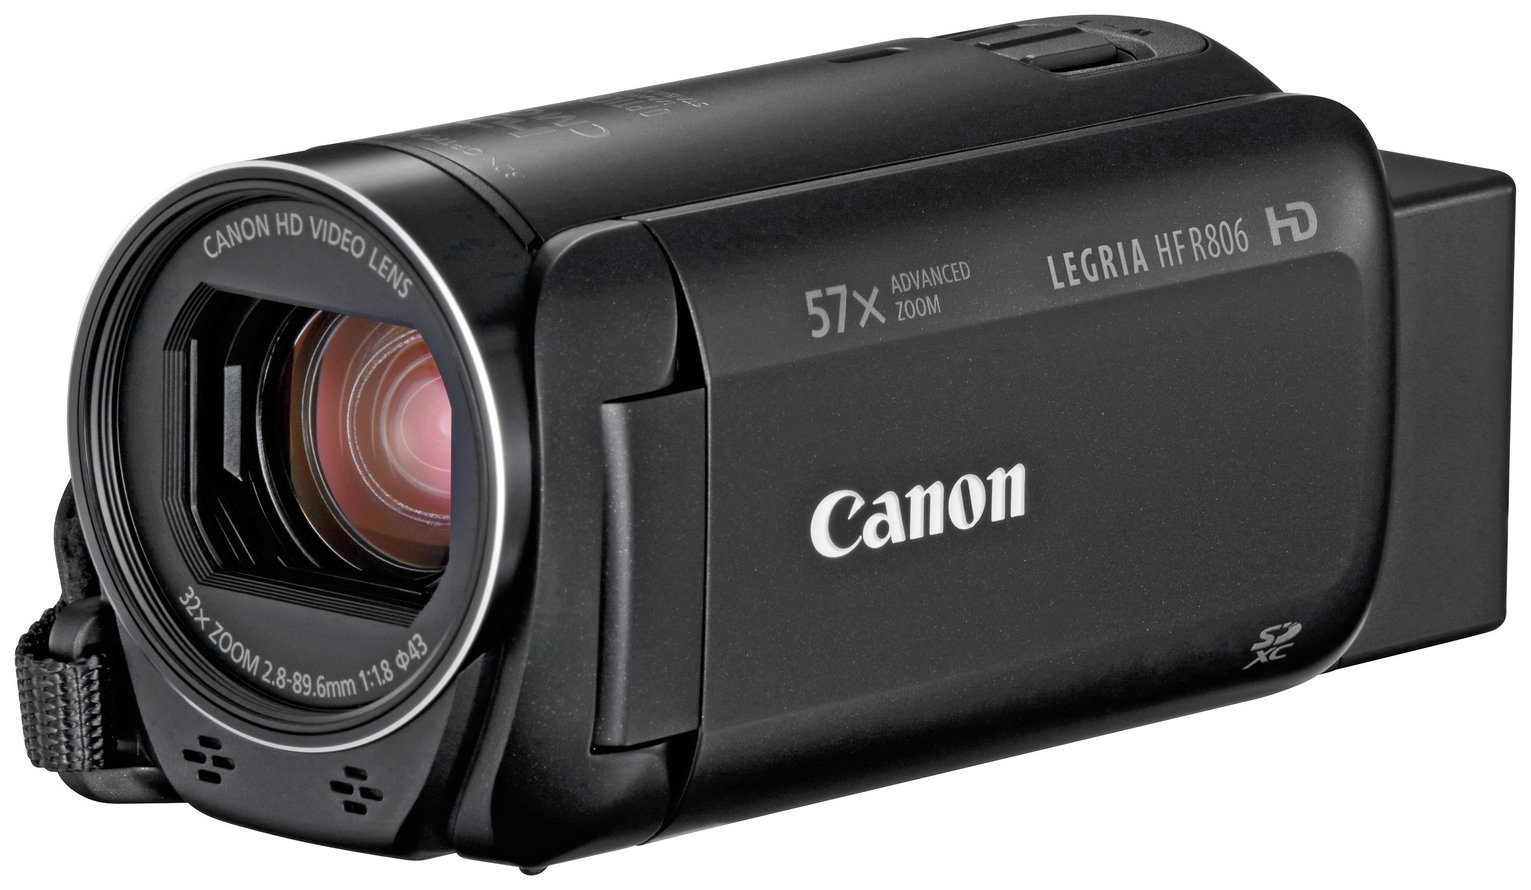 Canon Legria HF R806 Full HD Camcorder Bundle review